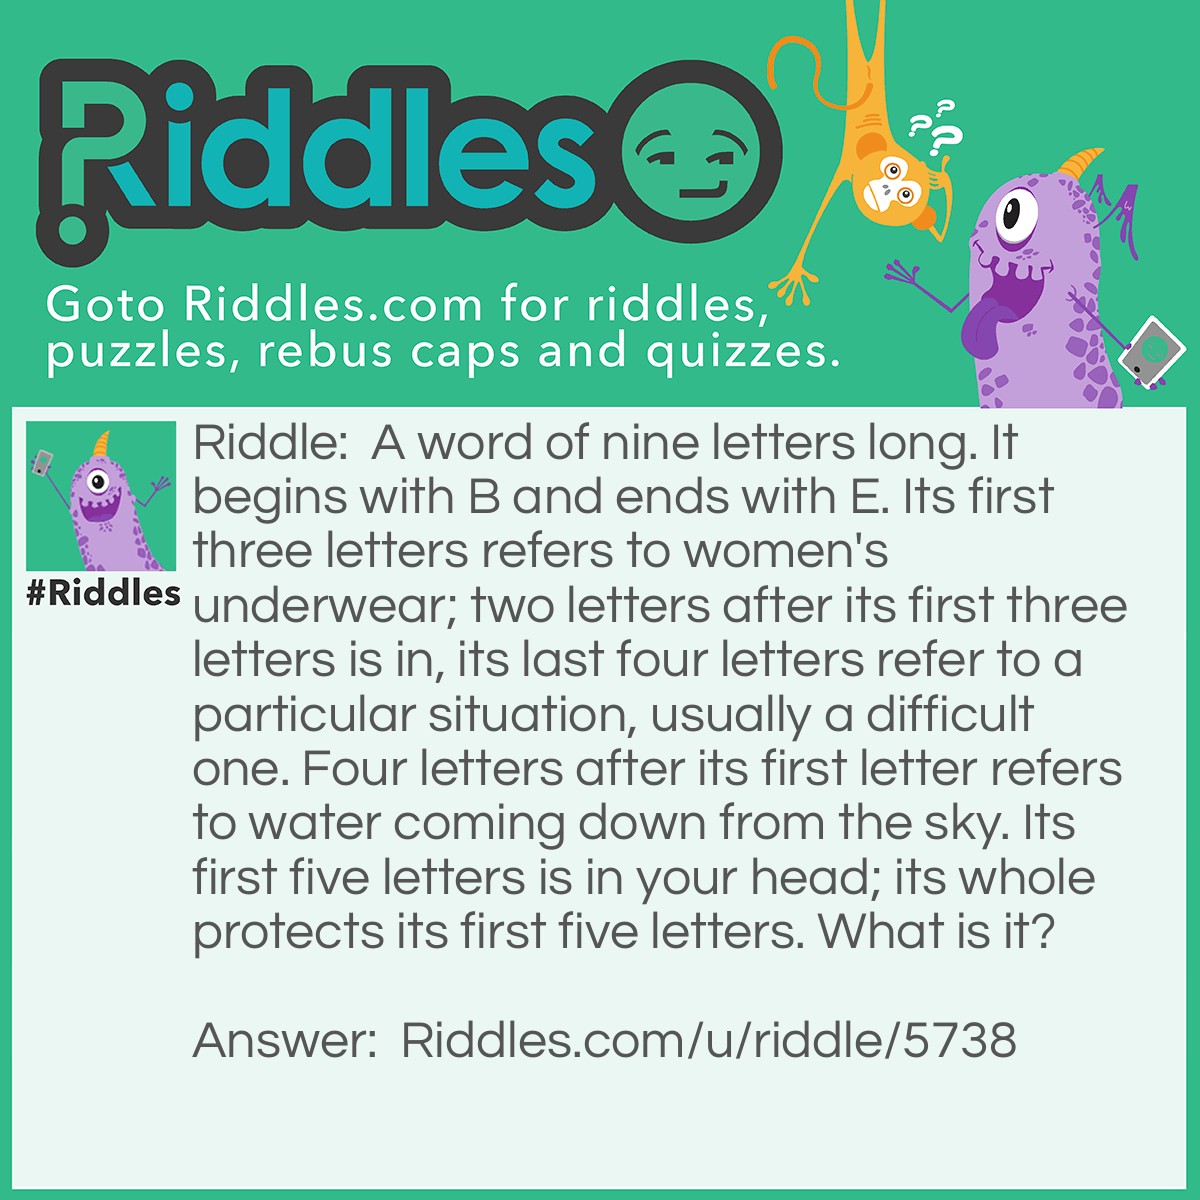 Riddle: A word of nine letters long. It begins with B and ends with E. Its first three letters refers to women's underwear; two letters after its first three letters is in, its last four letters refer to a particular situation, usually a difficult one. Four letters after its first letter refers to water coming down from the sky. Its first five letters is in your head; its whole protects its first five letters. What is it? Answer: It's a Braincase.